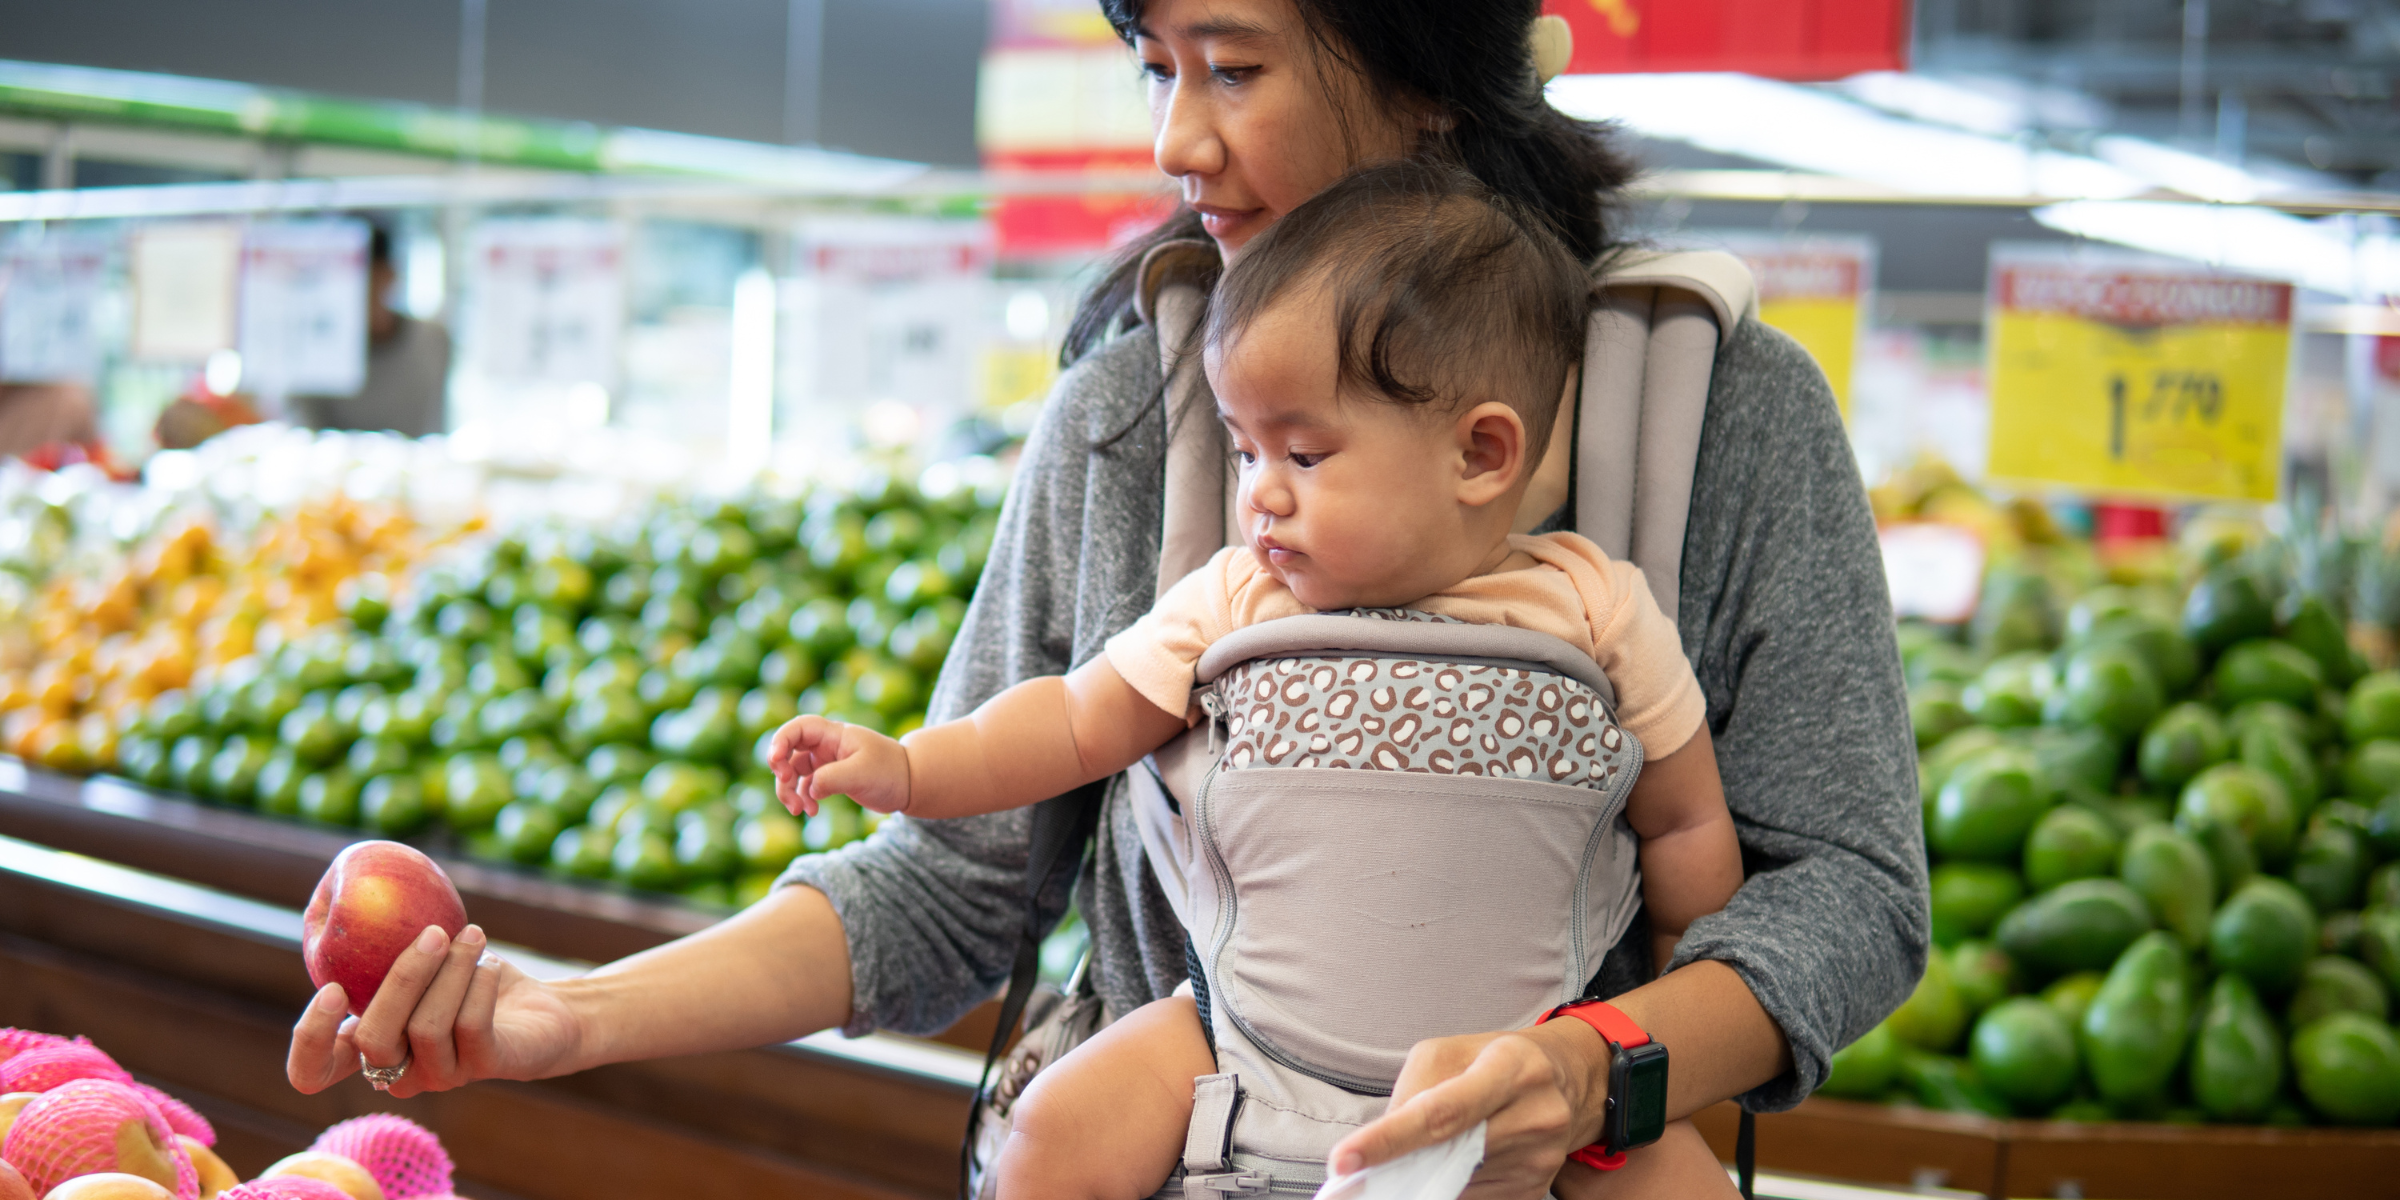 A mother and child shopping for groceries